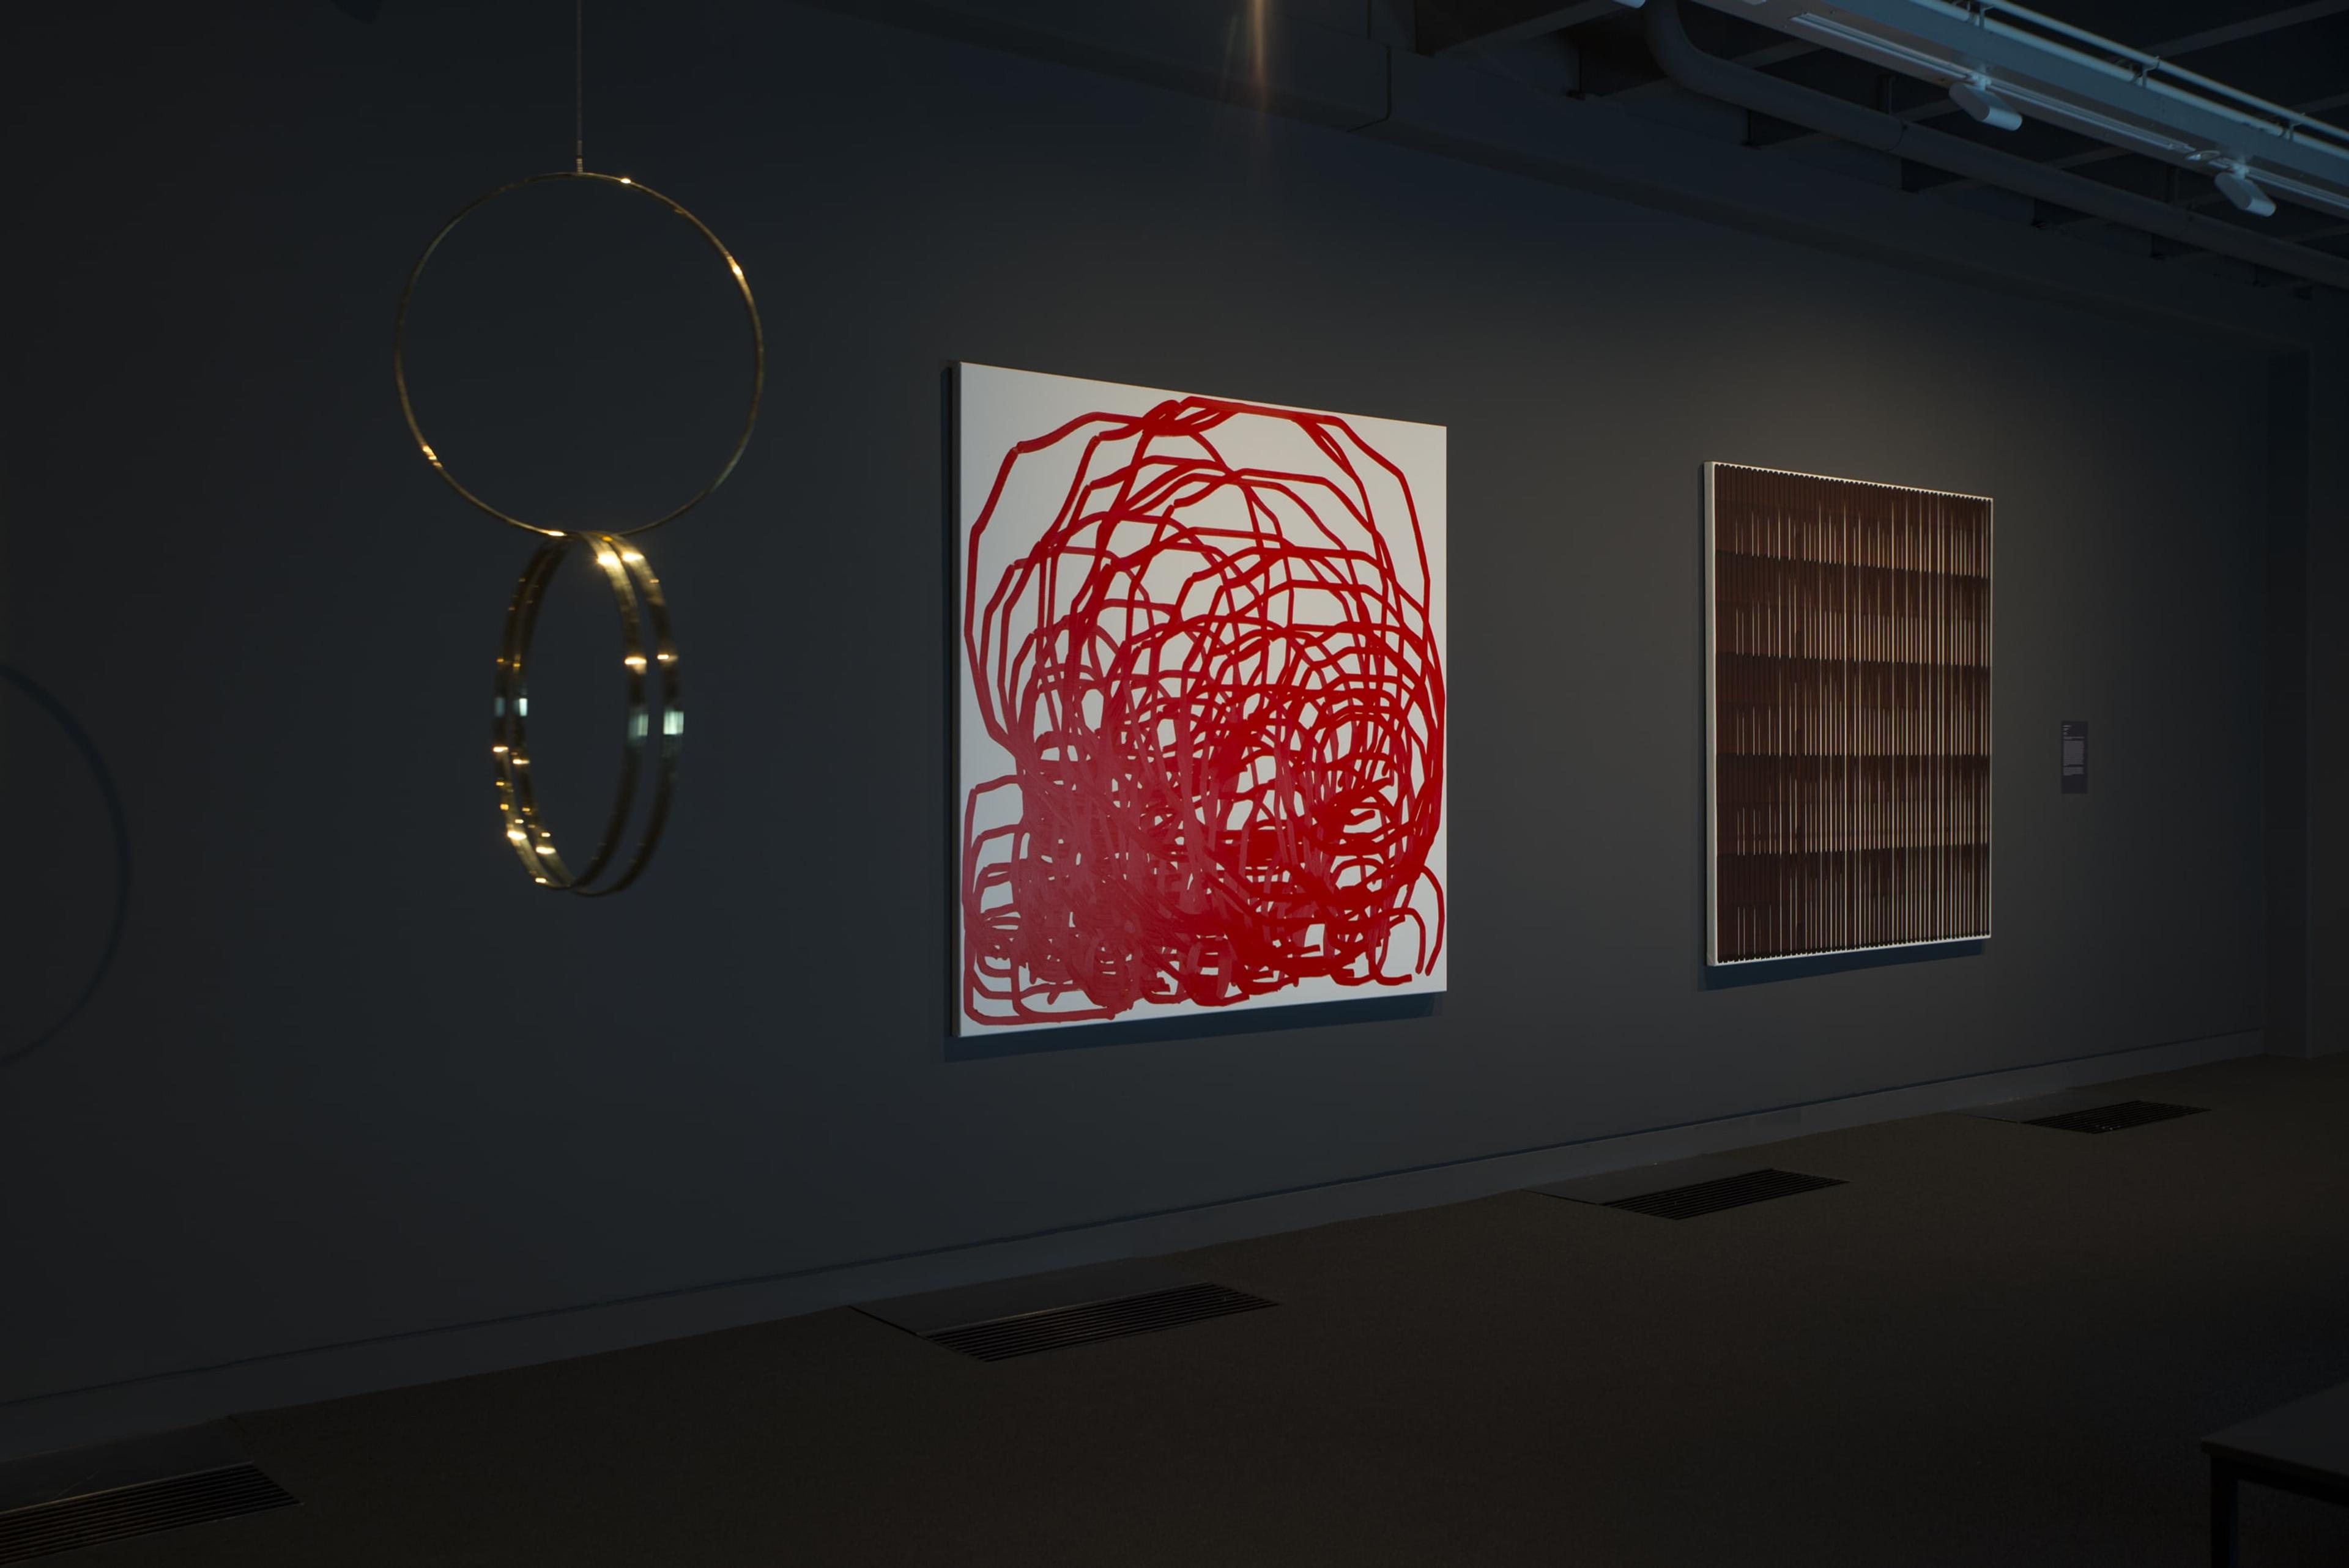 Installation view of Simon Ingram, Aldra Island, 2011, oil on canvas, and Ebino, 2011, oil on canvas, Victoria University of Wellington Art Collection, purchased 2018, partial gift of the artist and Gow Langsford Gallery; and Dane Mitchell, Structural Formula, Water Molecule, 2015, brass, Victoria University of Wellington Art Collection, purchased 2018, in the exhibition Solid State: Works from the Victoria University of Wellington Art Collection, 6 October – 20 December 2018, Adam Art Gallery Te Pātaka Toi.